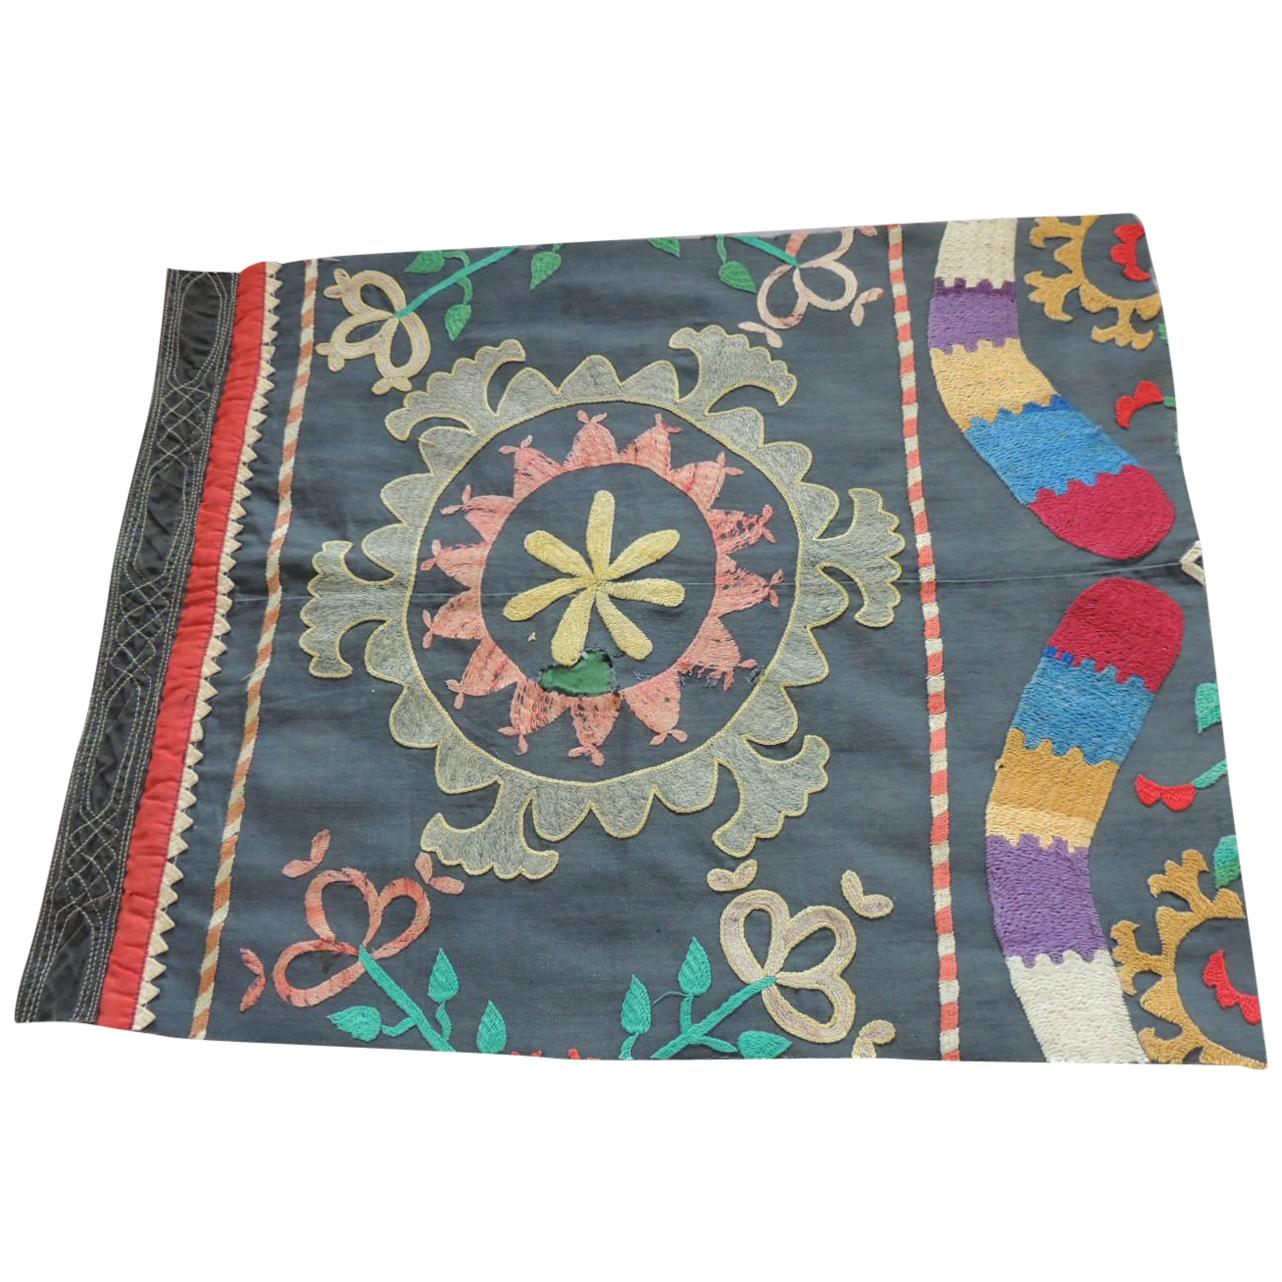 Colorful Floral Embroidered Vintage Suzani Fragment